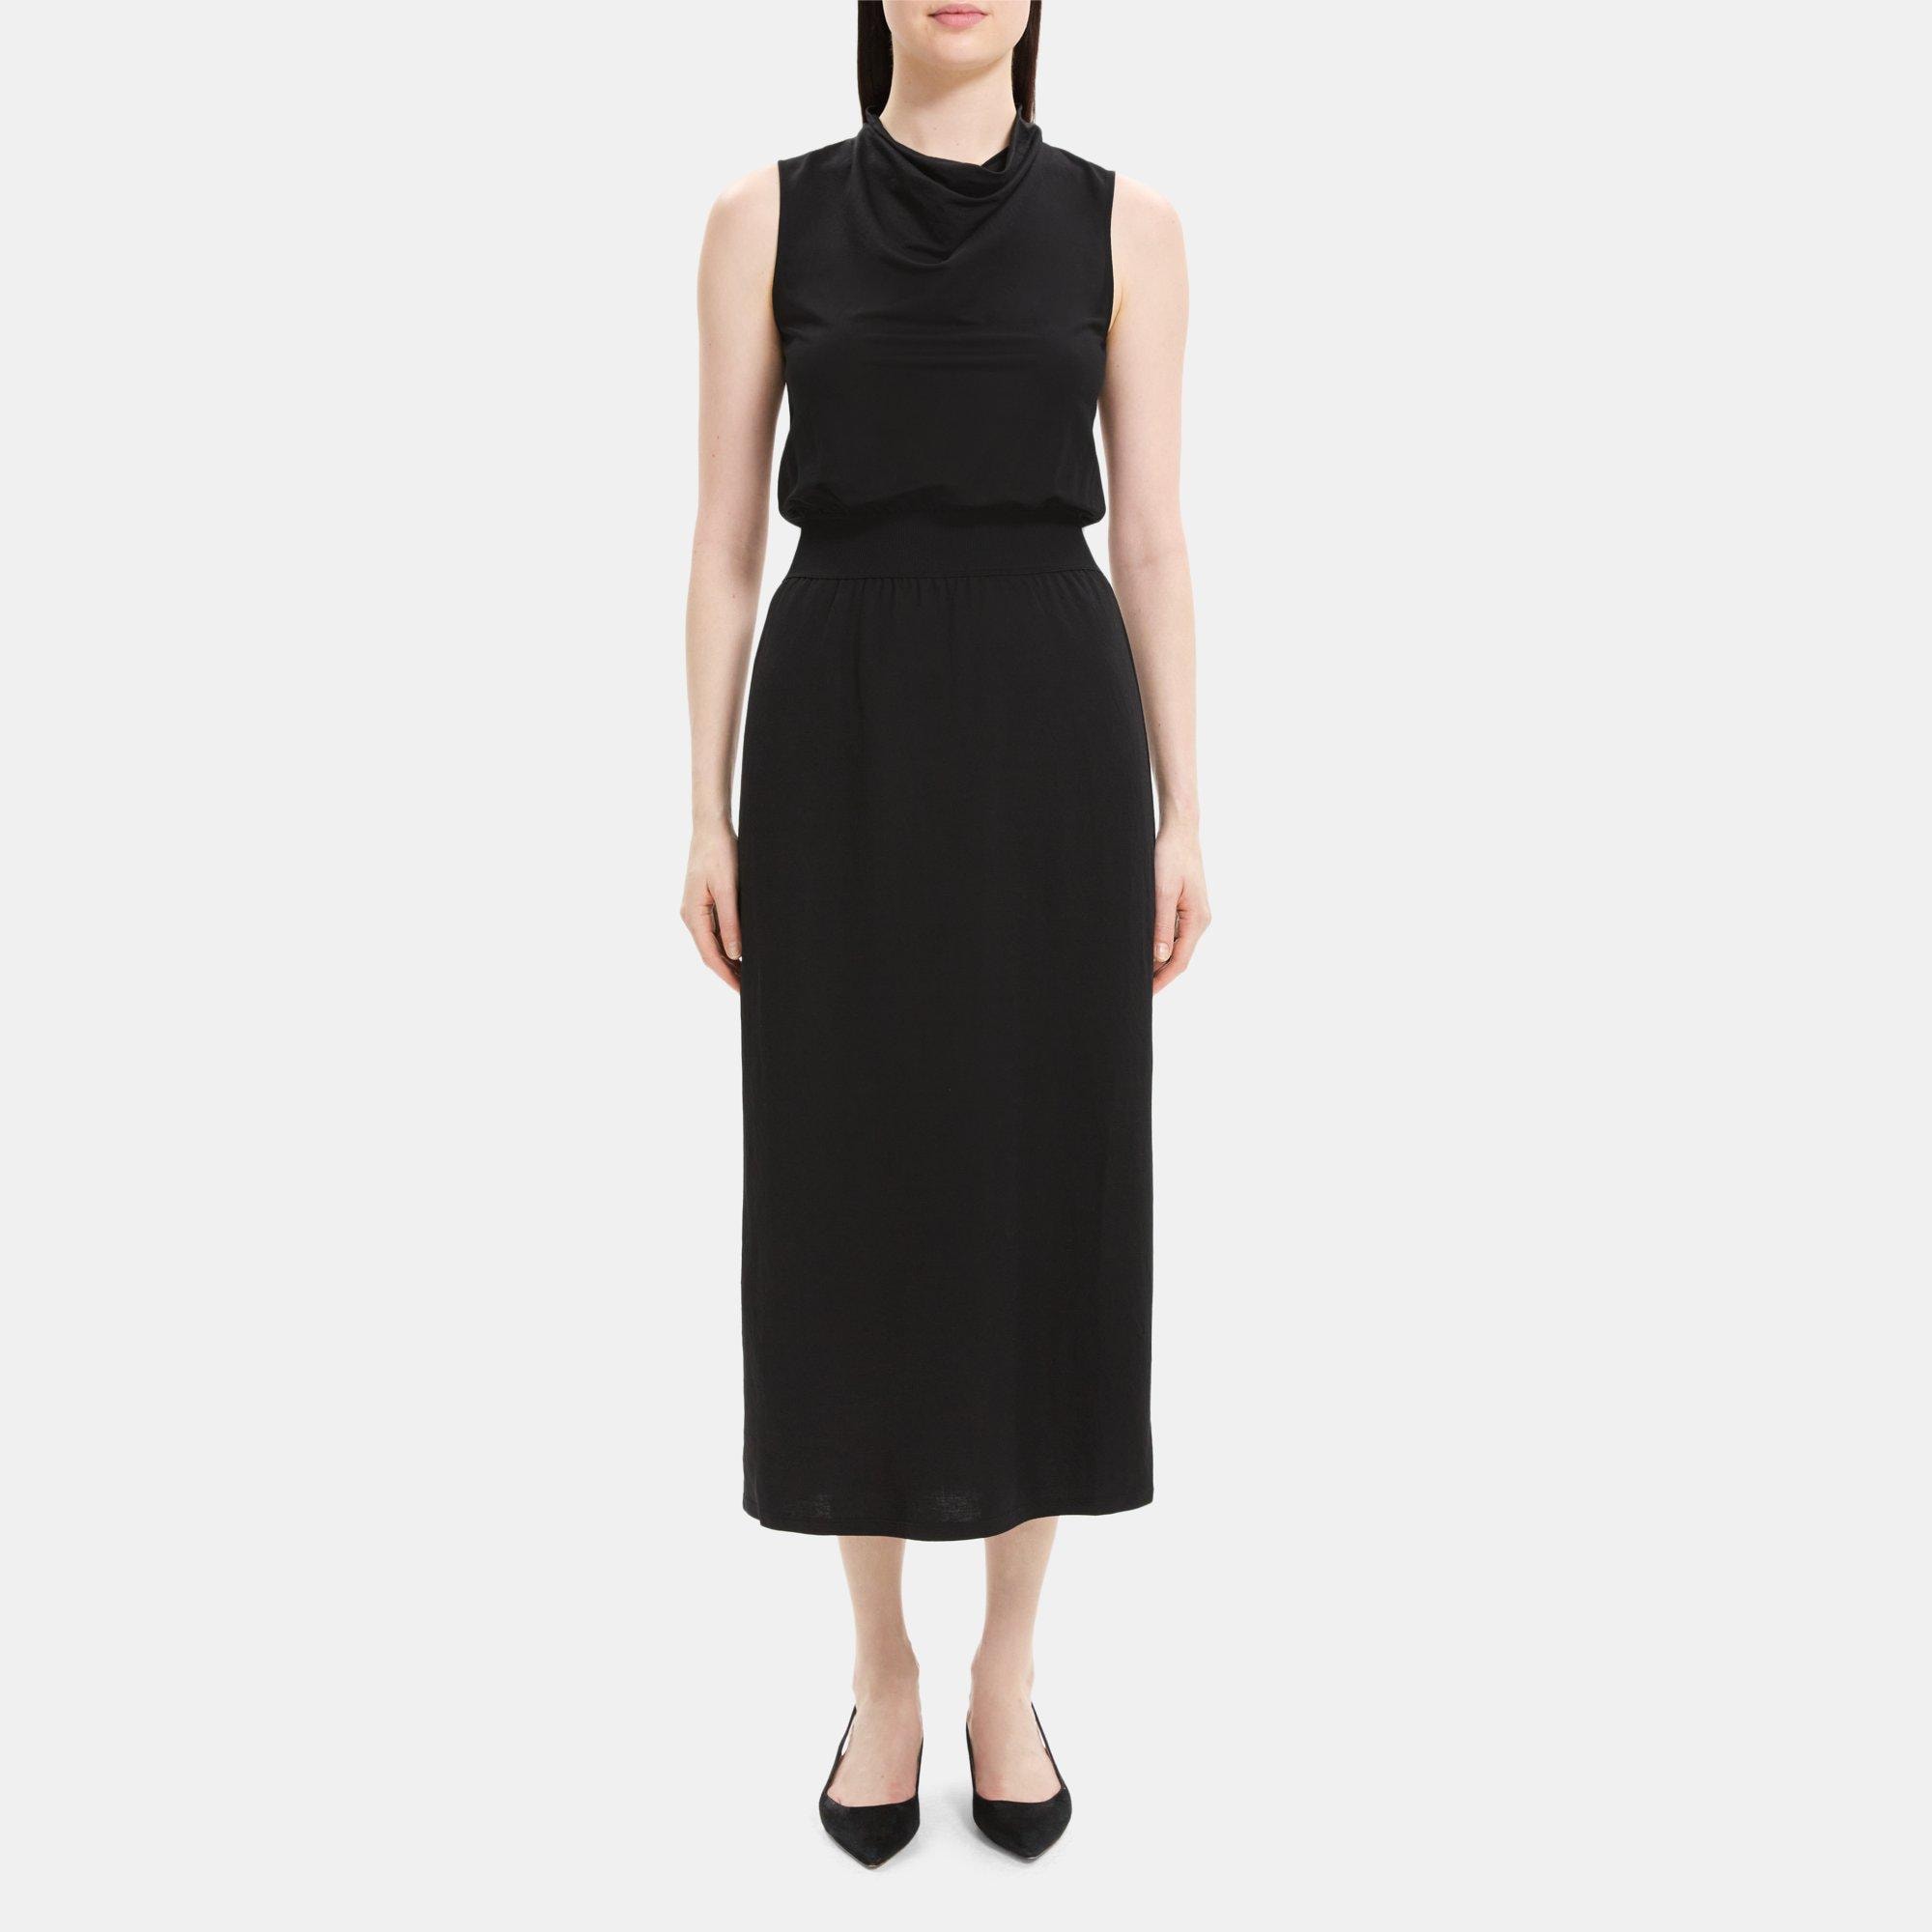 Theory Sleeveless Cowl Neck Dress in Viscose-Blend Pique